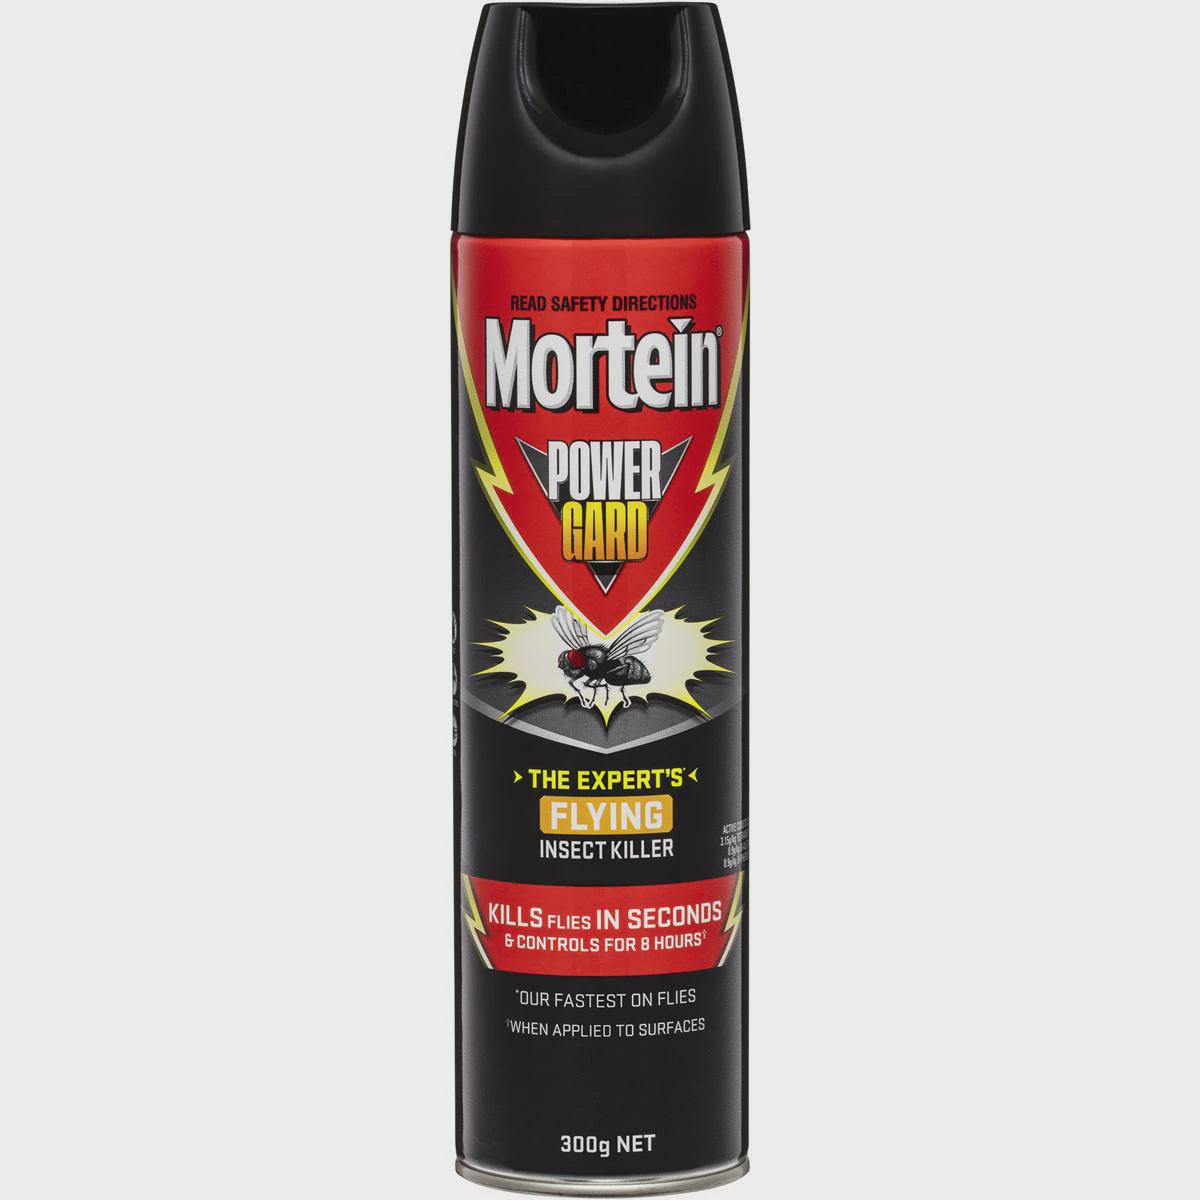 Mortein Powergard Flying Insect Killer Rapid 300G